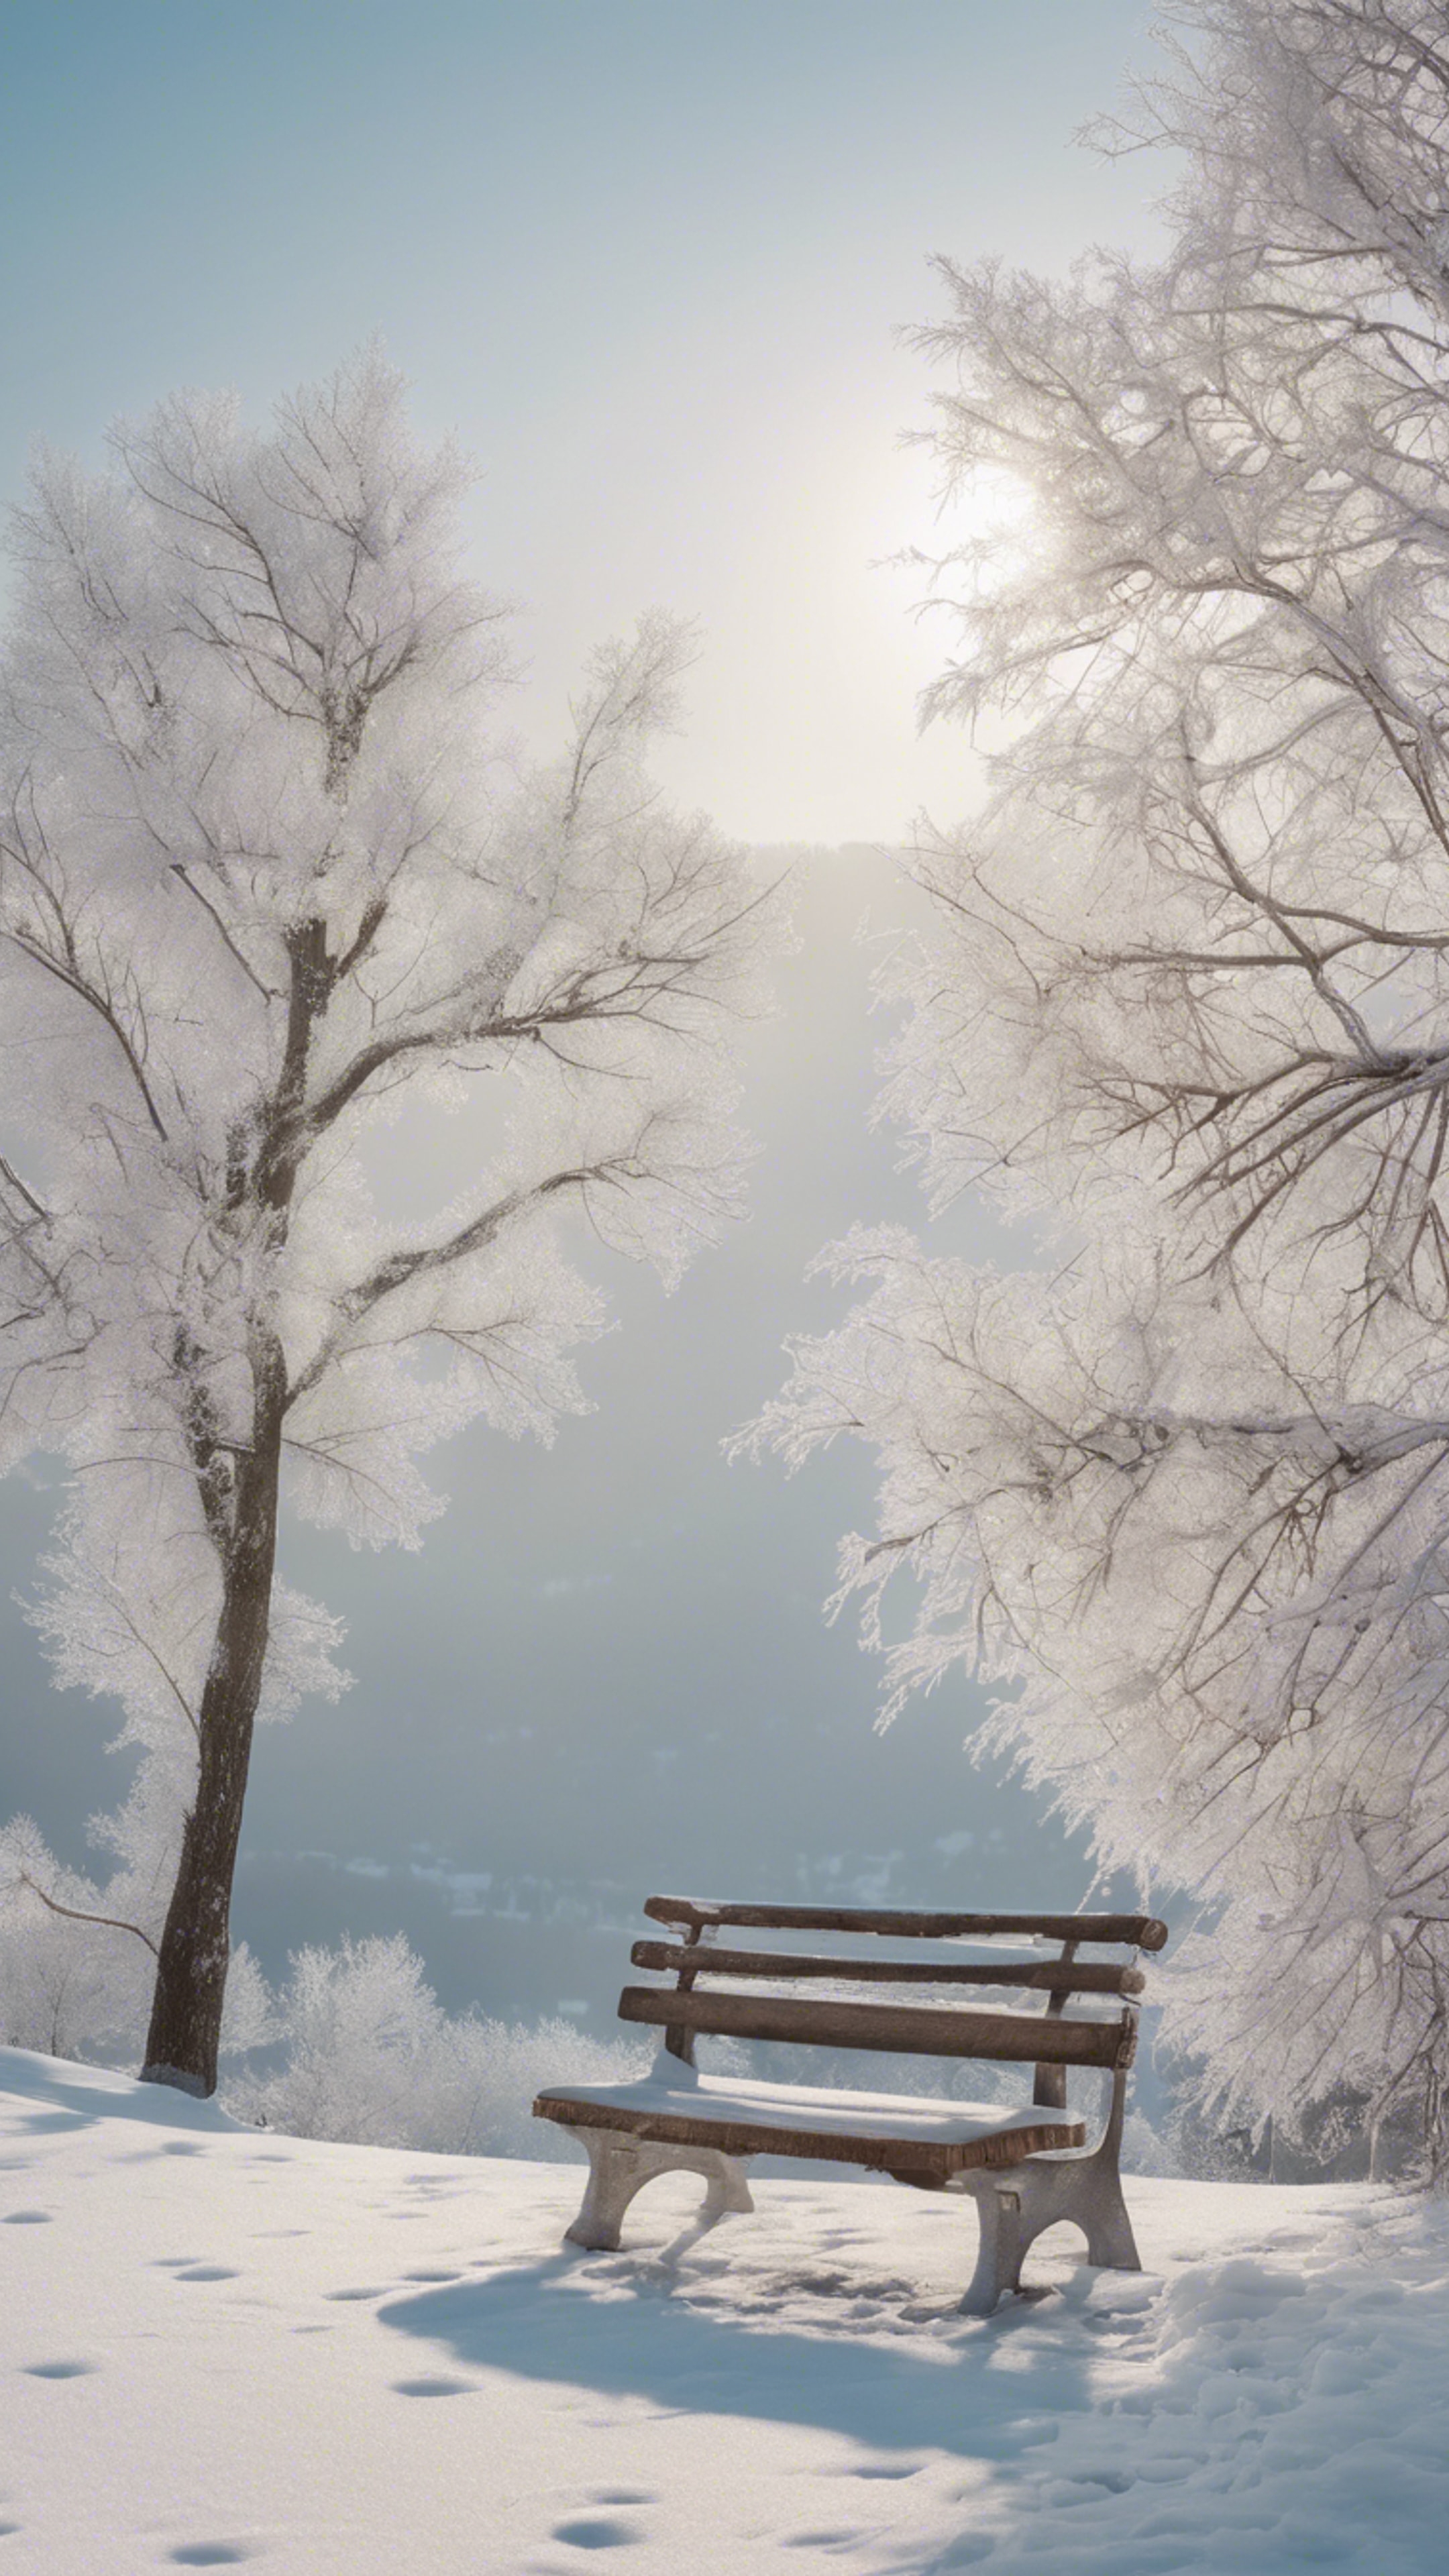 “A snowy landscape at the peak of winter, where a lonely bench is seen covered in fresh white snow, and the barren trees are frosted with ice.” Wallpaper[2c4143ce95a64d6693bc]